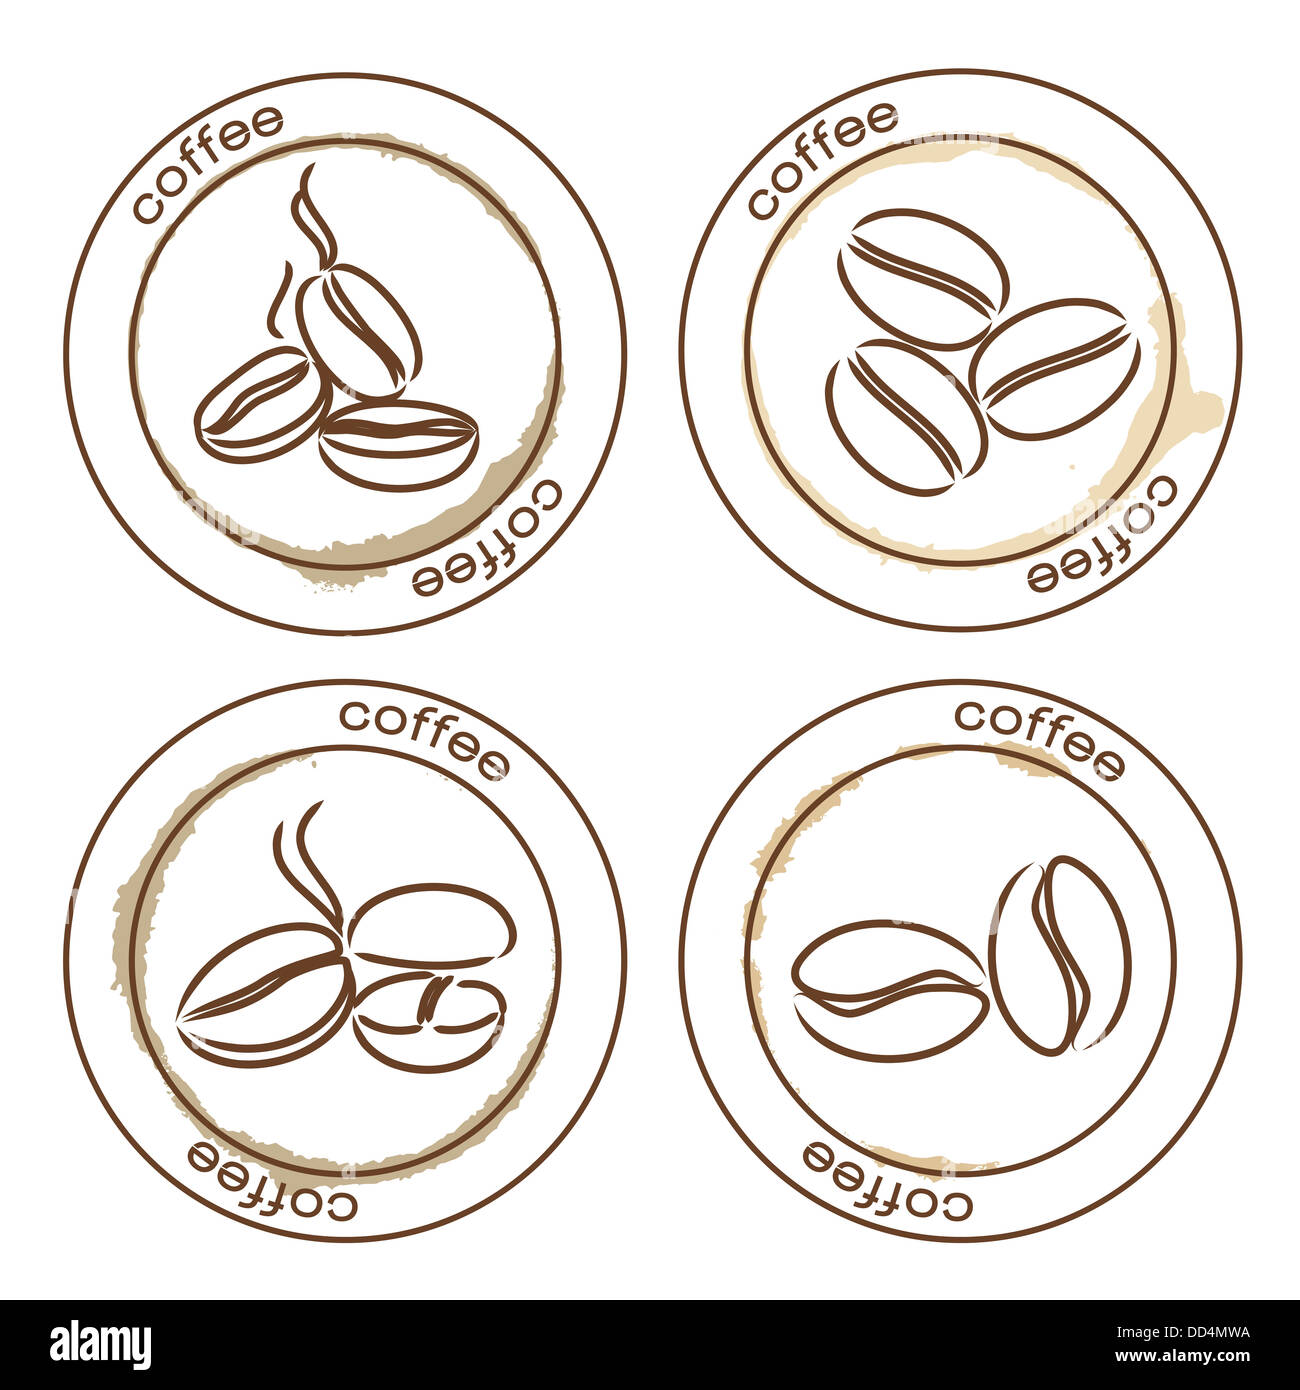 coffee beans labels on white Stock Photo